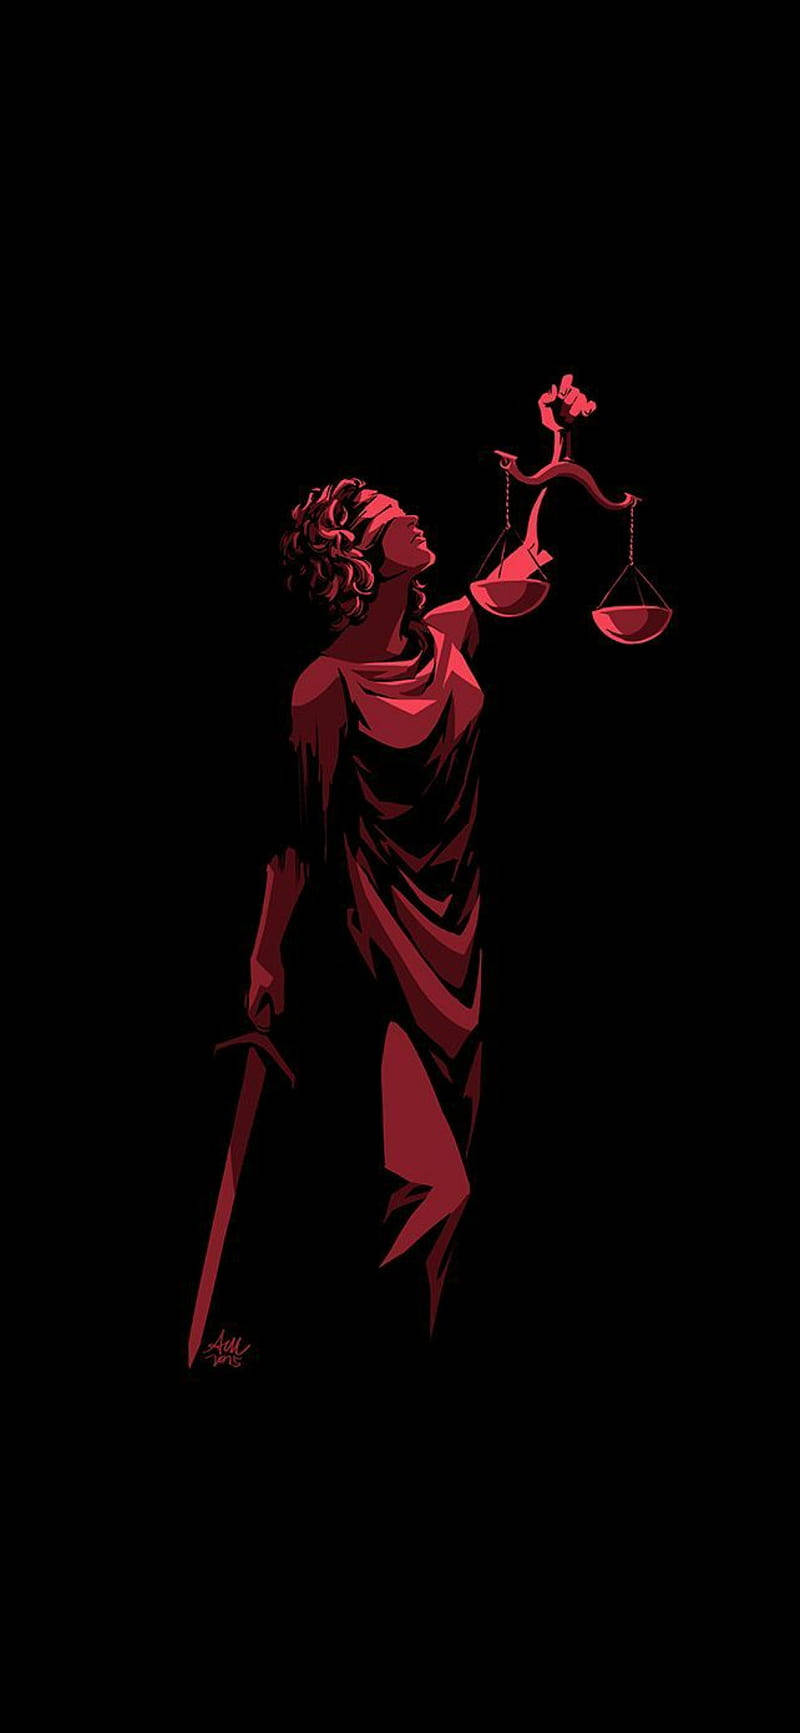 Lady Justice Black And Red Digital Art